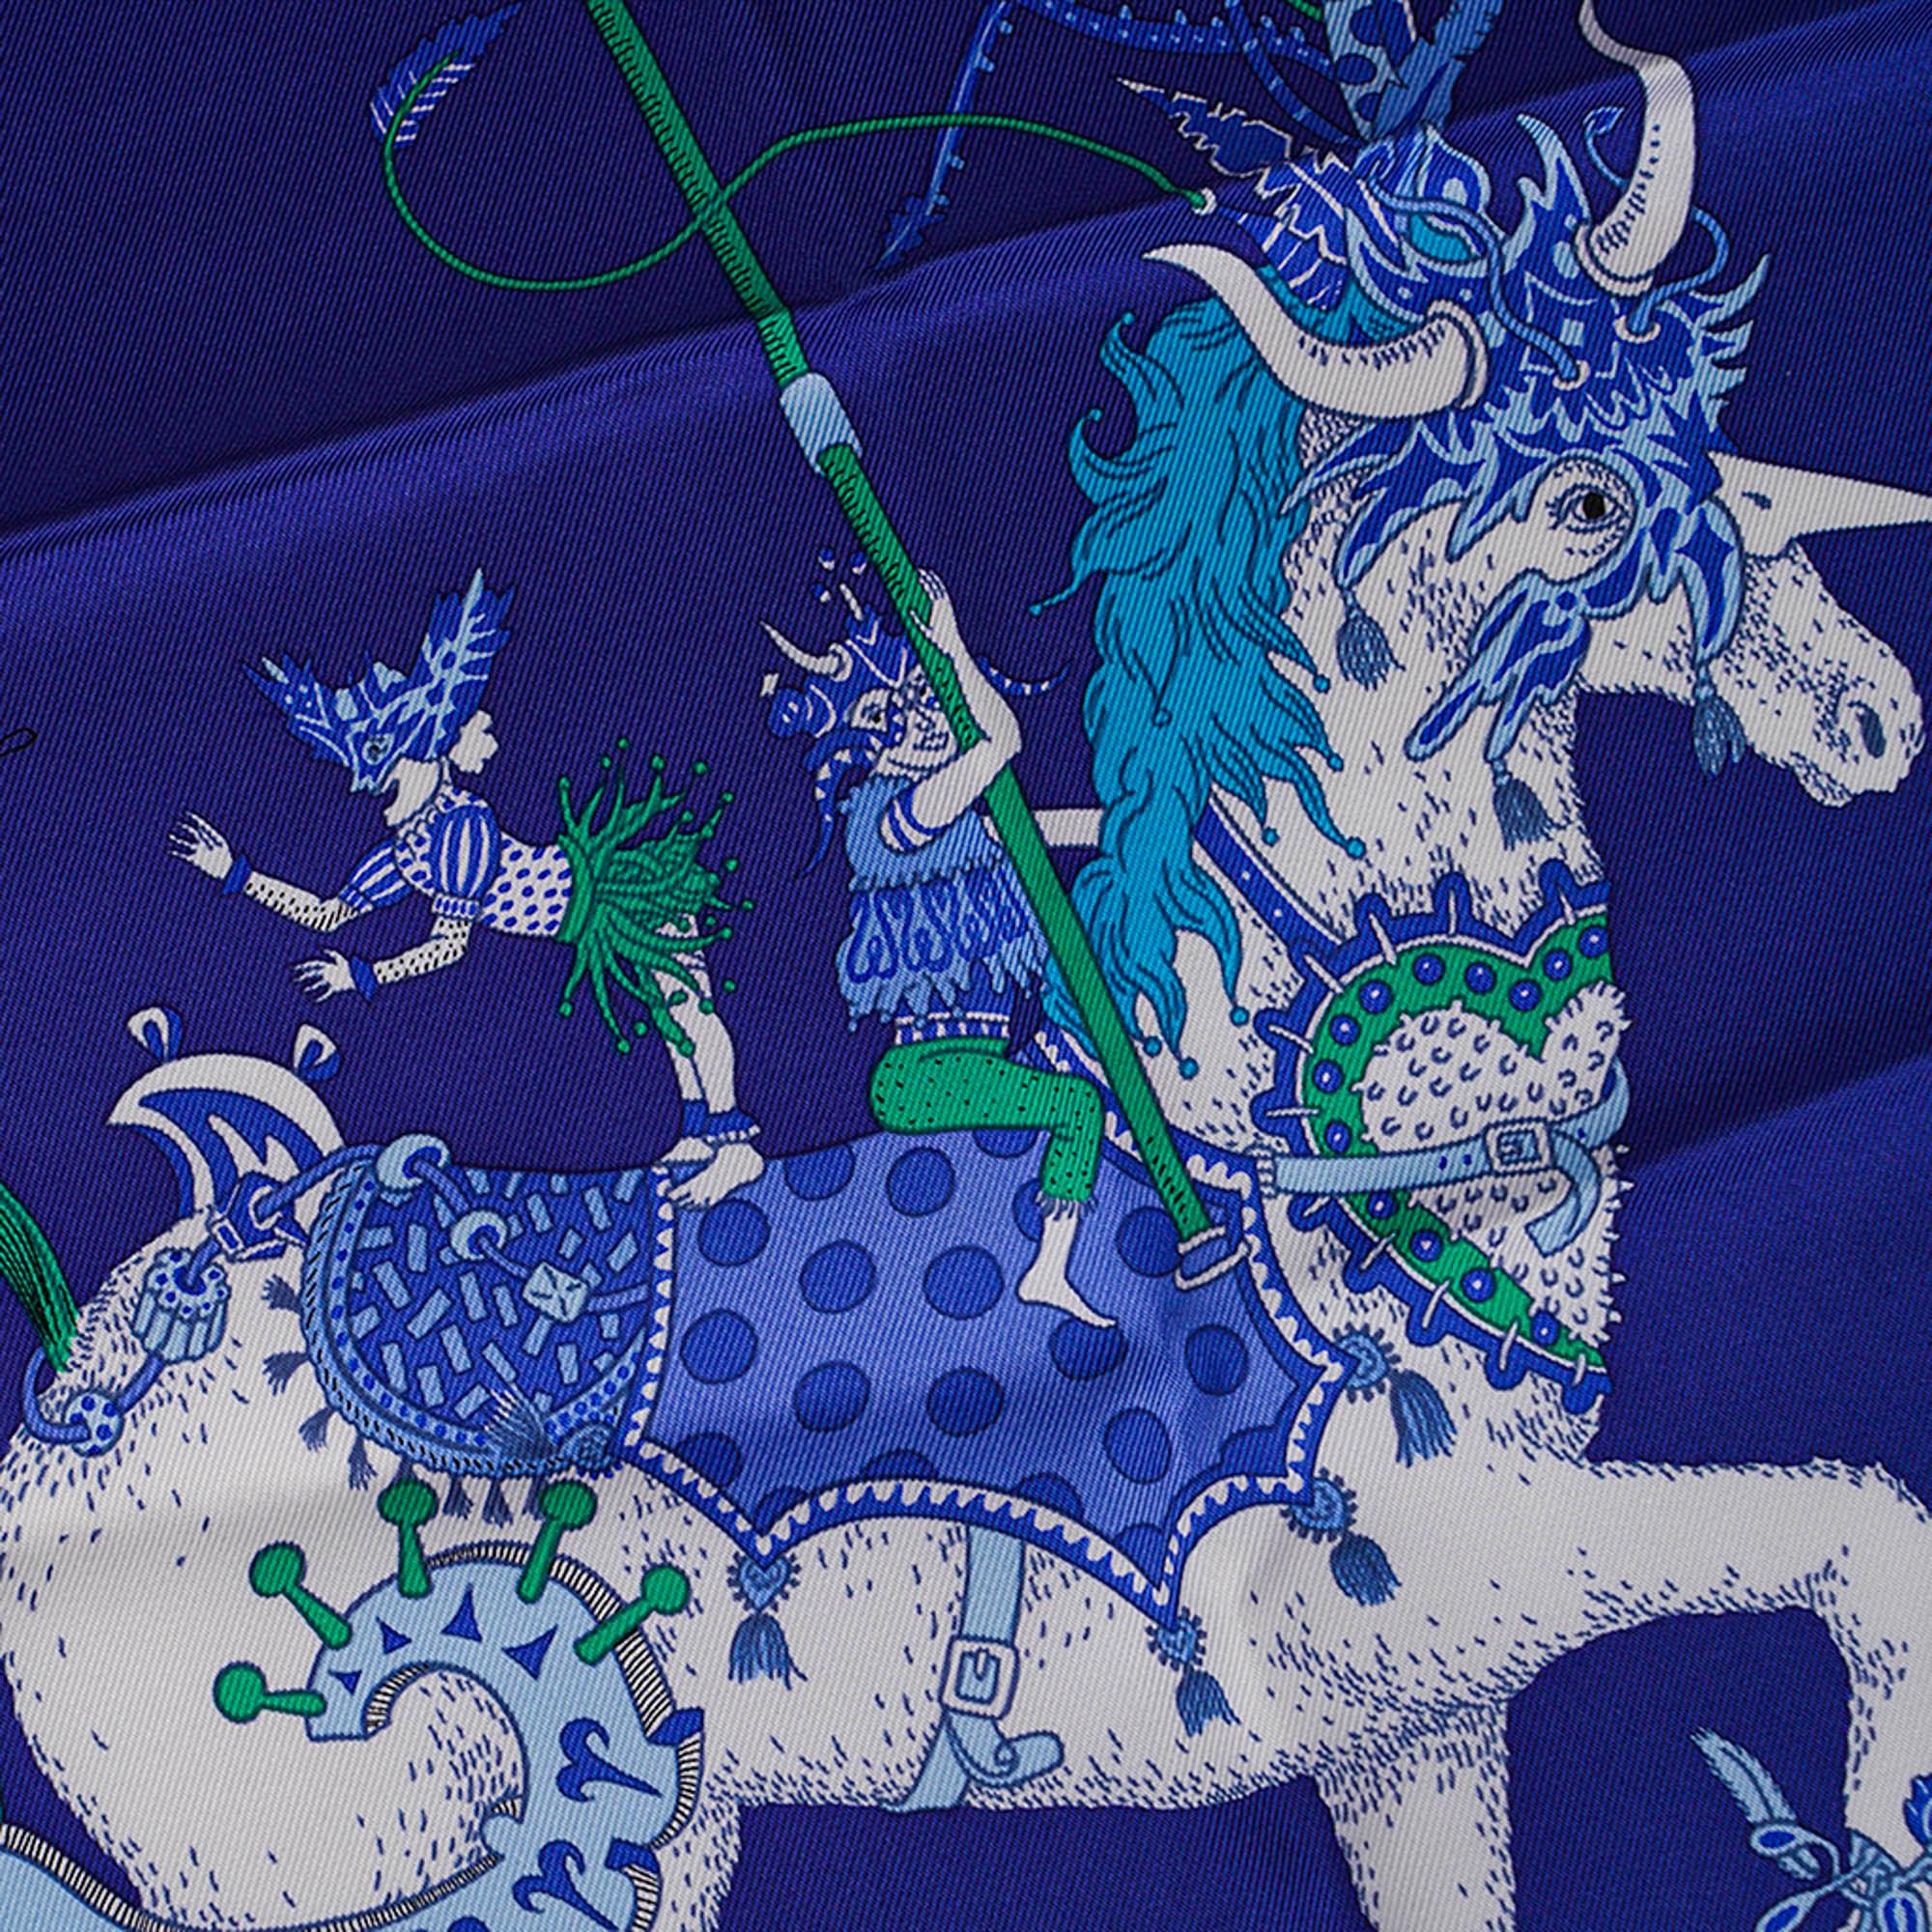 Mightychic offers an  Hermes La Folle Parade silk twill scarf.
Featured in Bleu Azur and Bleu Encre colorway.
Designed by Claire Fanjul, the scarf is inspired by an 18th century engraving
of a carnival float.
Hand rolled edge.
Comes with Signature